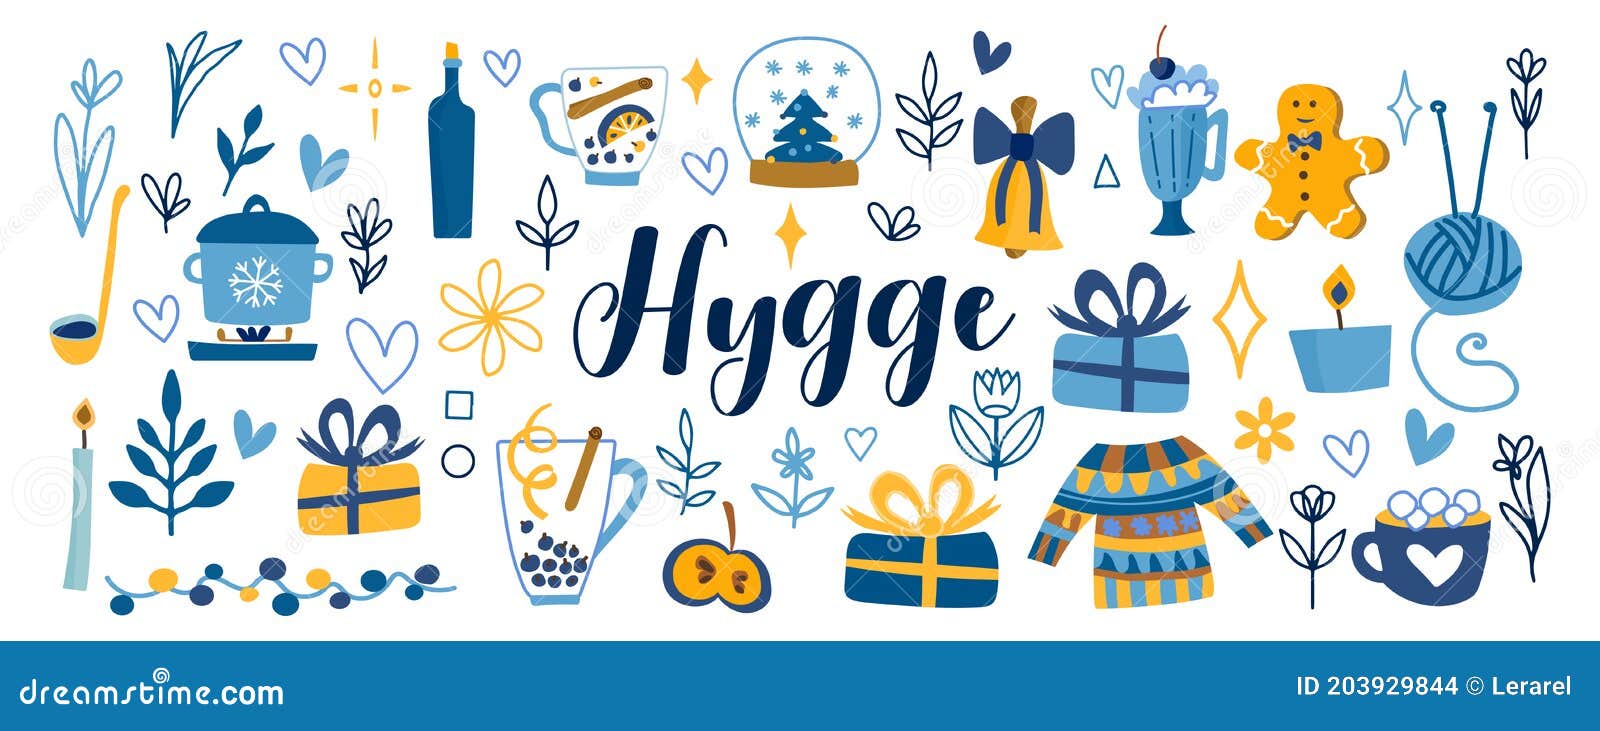 cute   of autumn and winter hygge s.  on white background. motivational typography of hygge